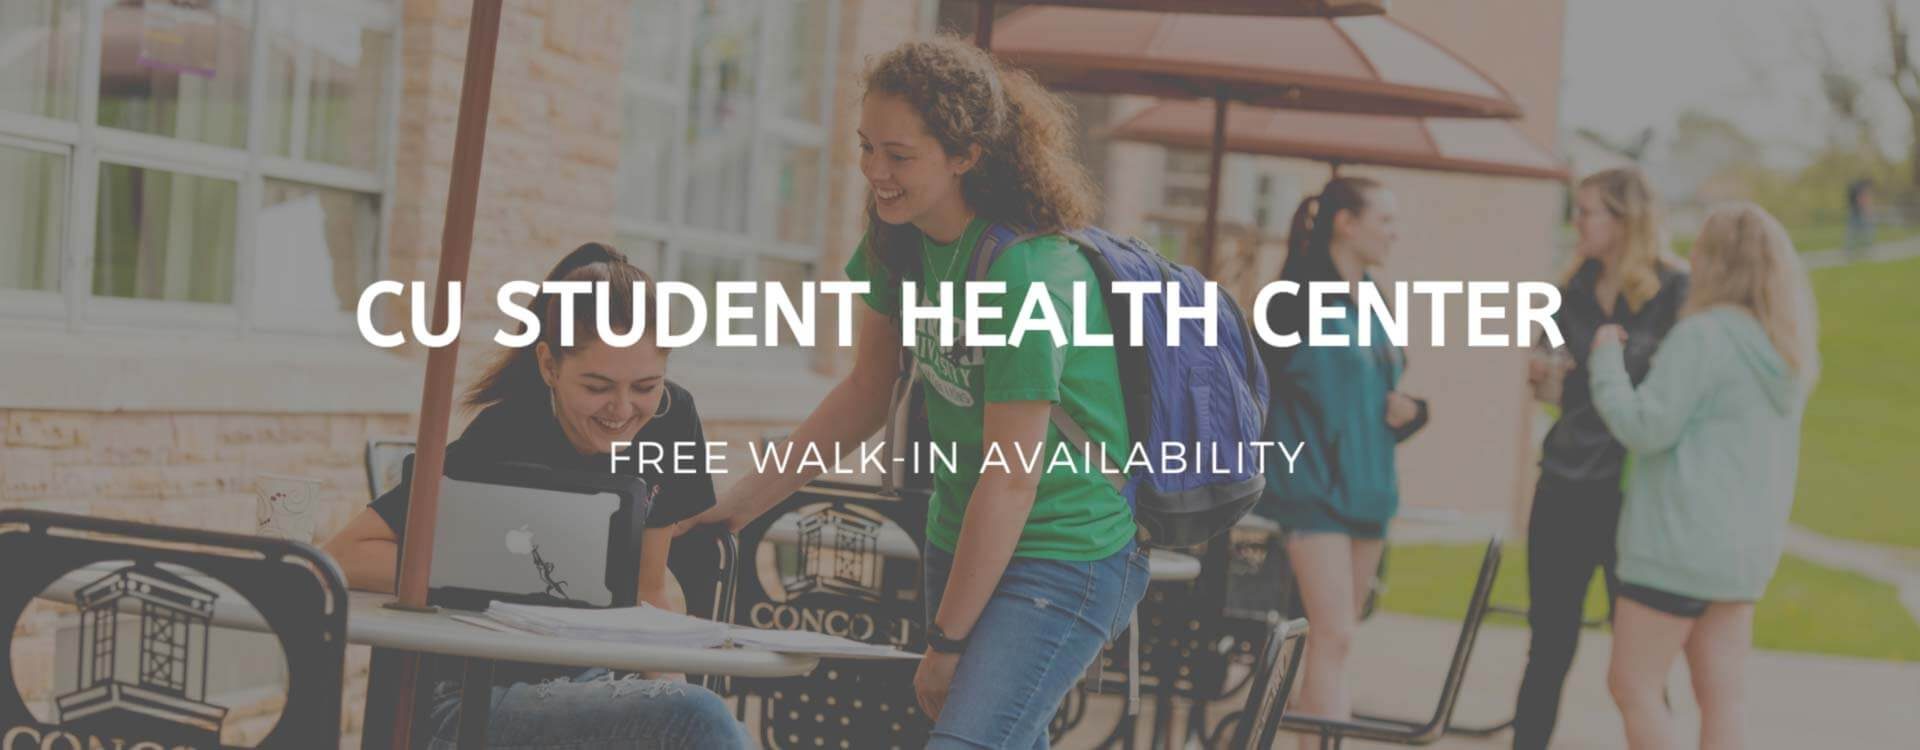 CU Student Health Center: Free walk-in availability! Click here to learn more